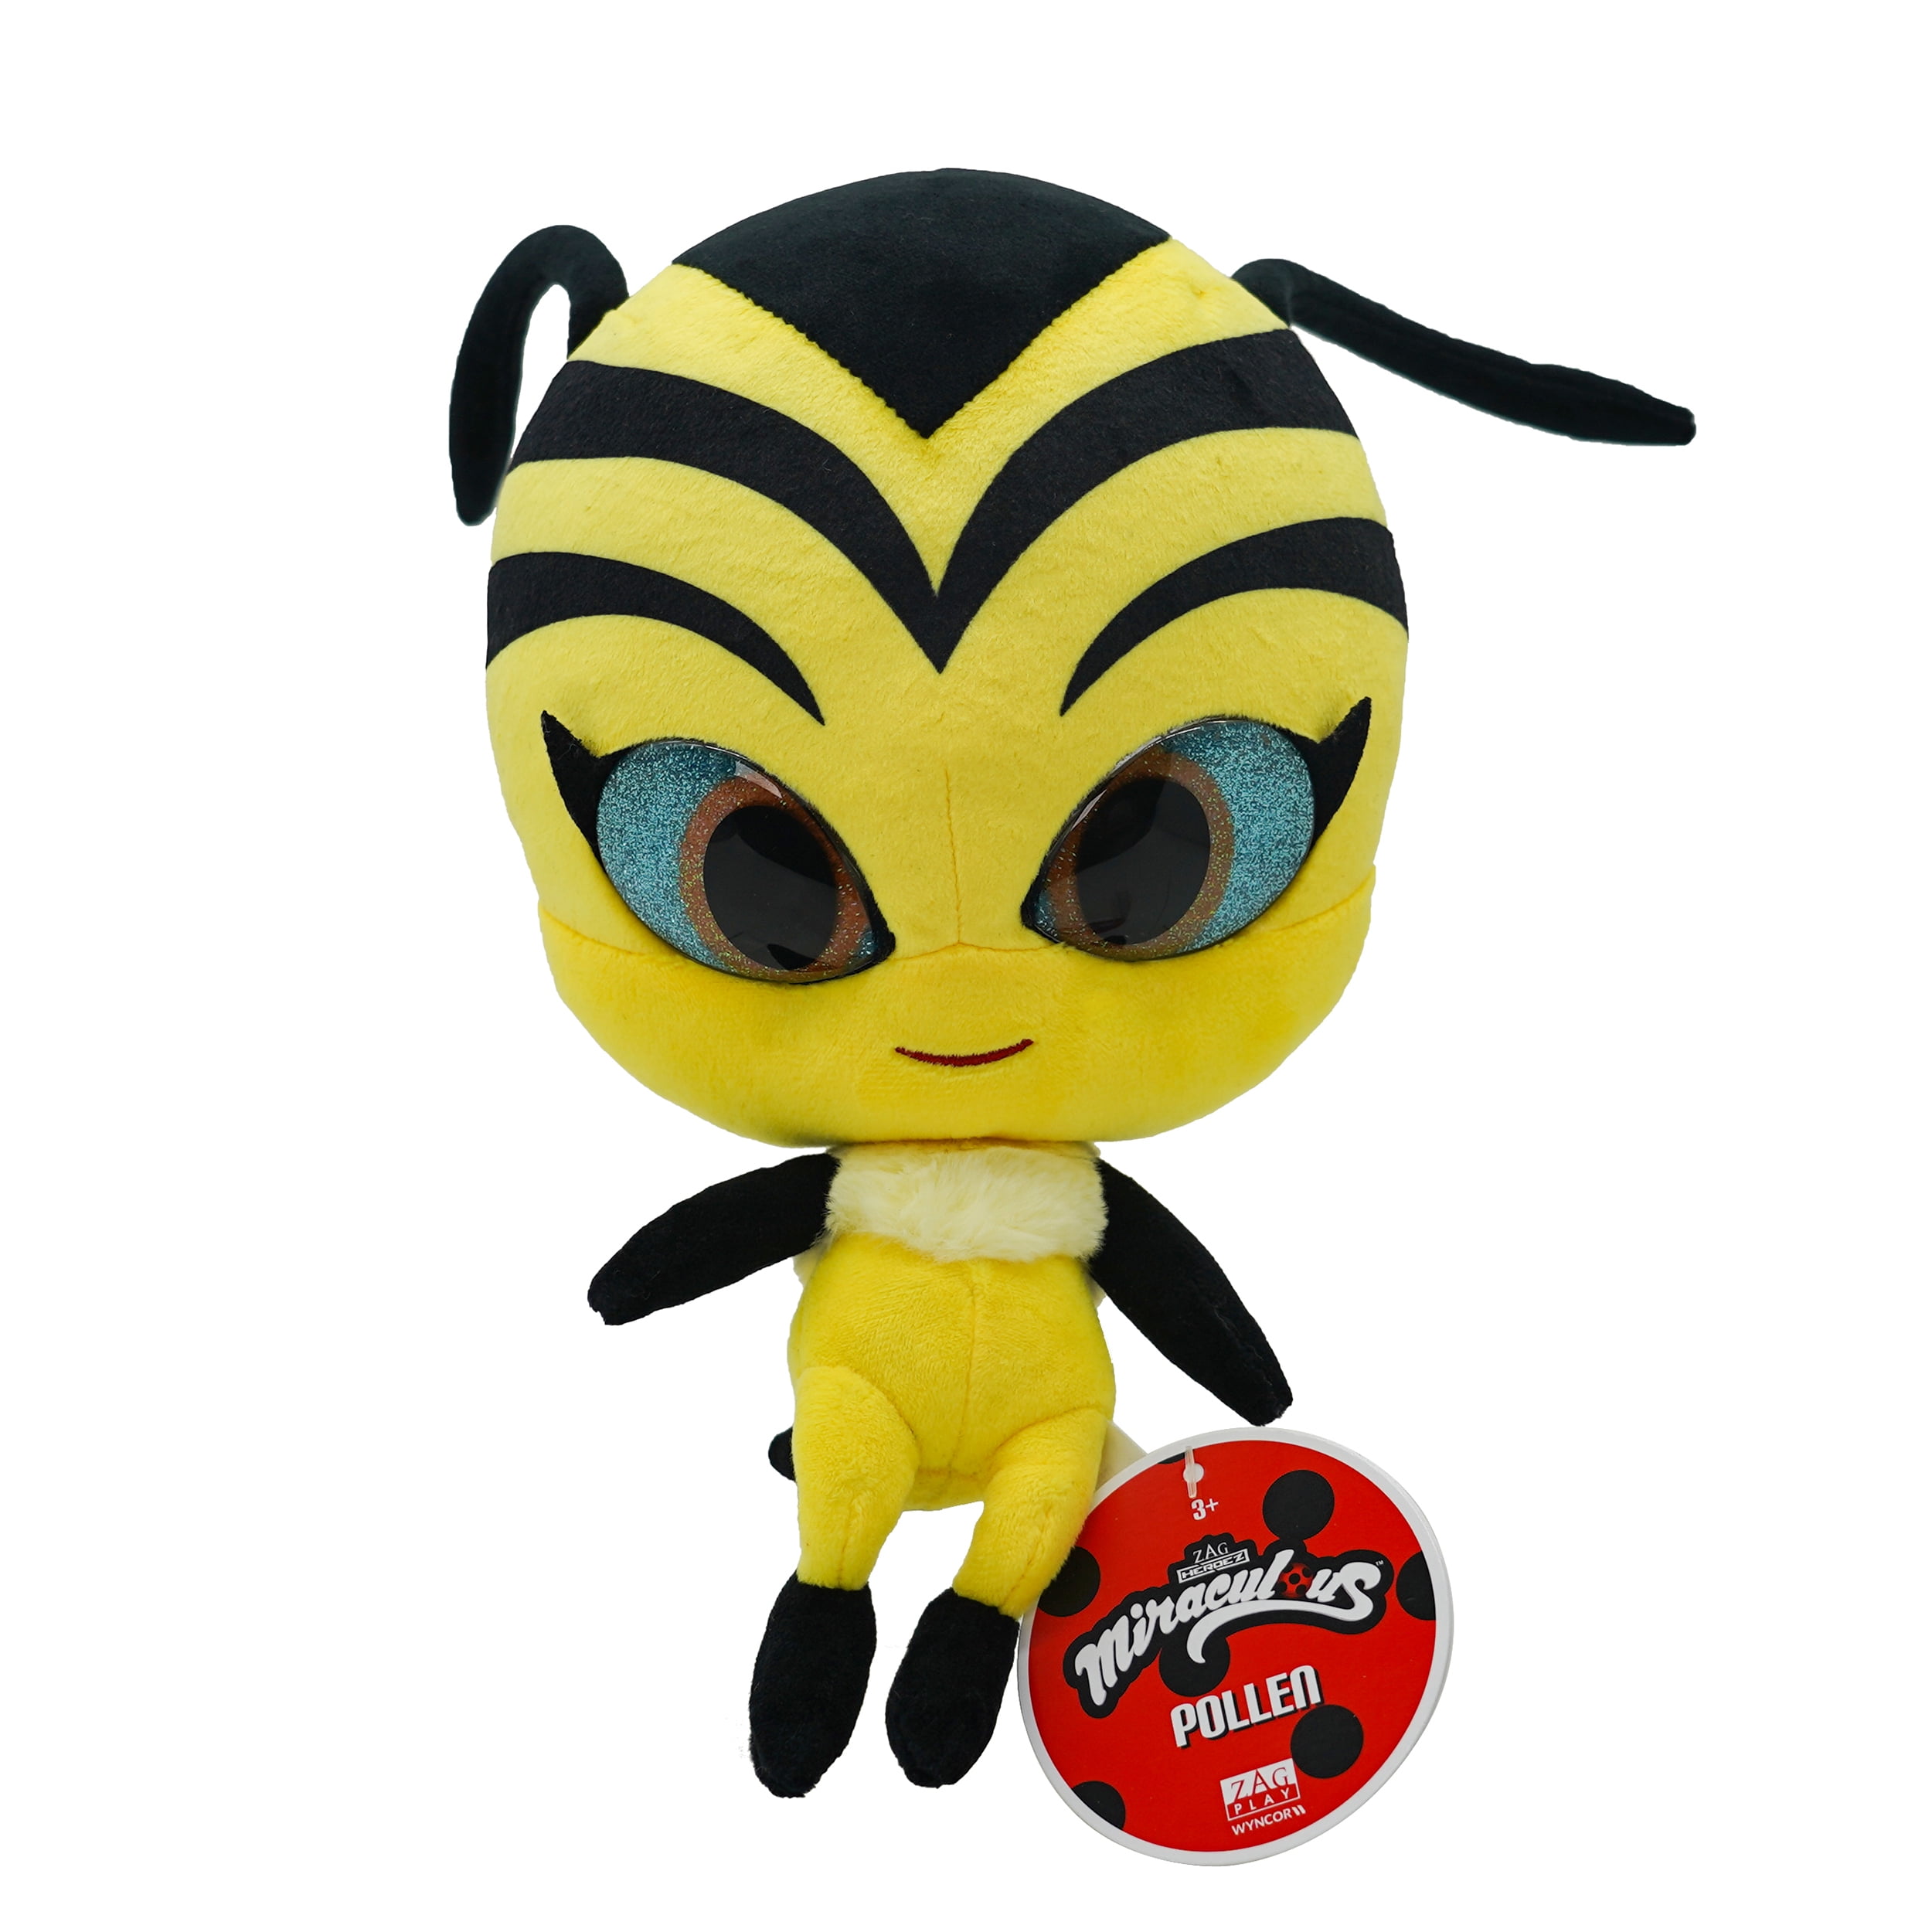 Miraculous Ladybug, 4-1 Surprise Miraball, Toys for Kids with Collectible  Character Metal Ball, Kwami Plush, Glittery Stickers and White Ribbon,  Wyncor 